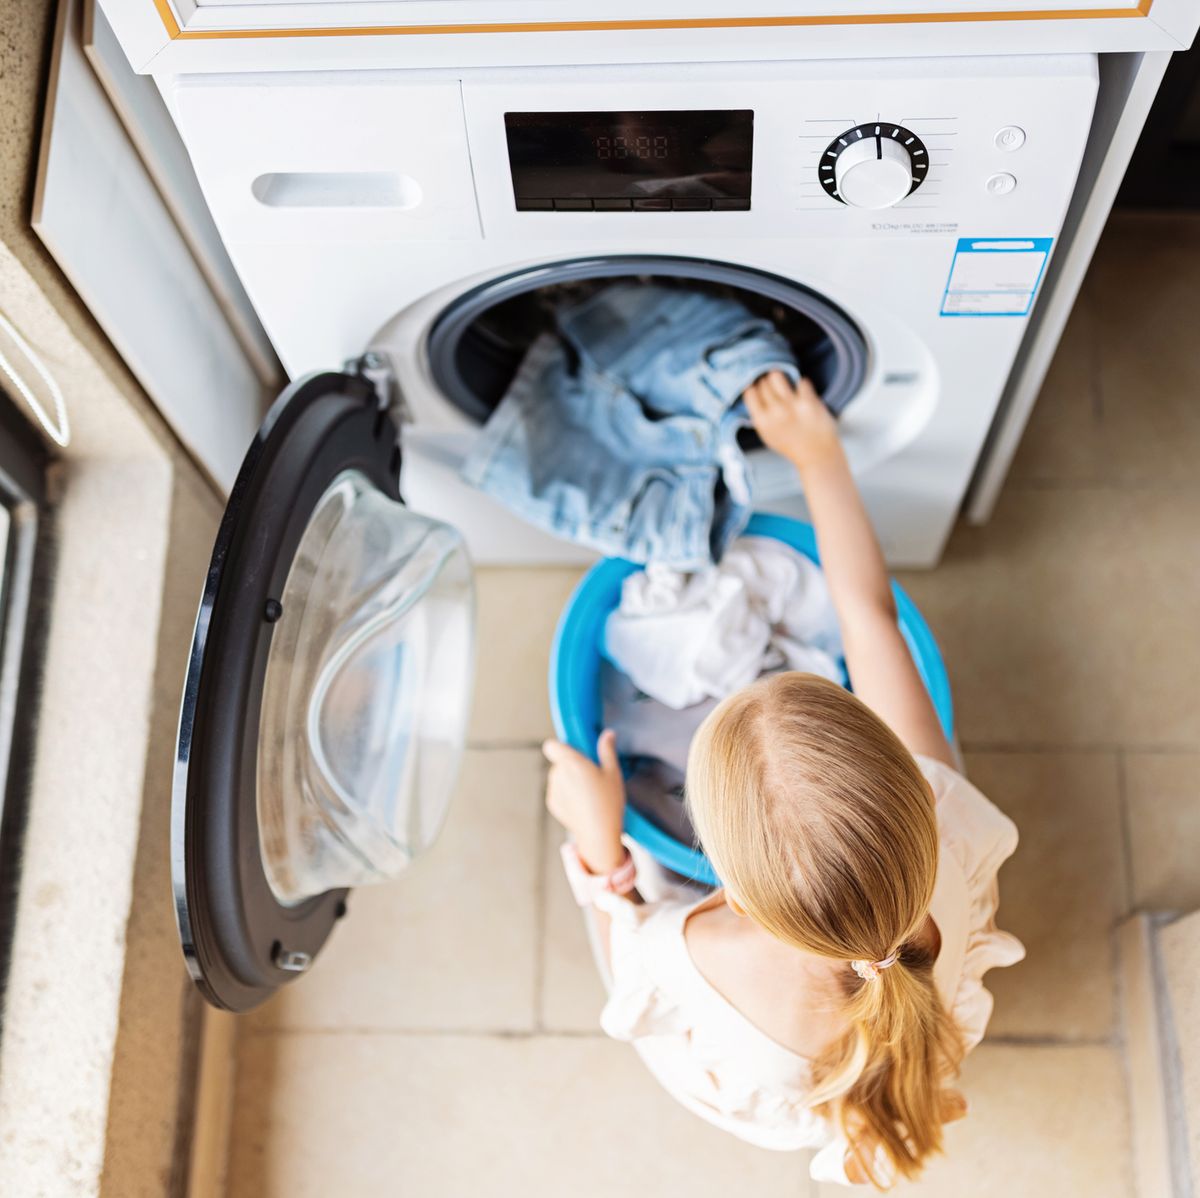 Heated clothes airer or tumble dryer: which is the better appliance?